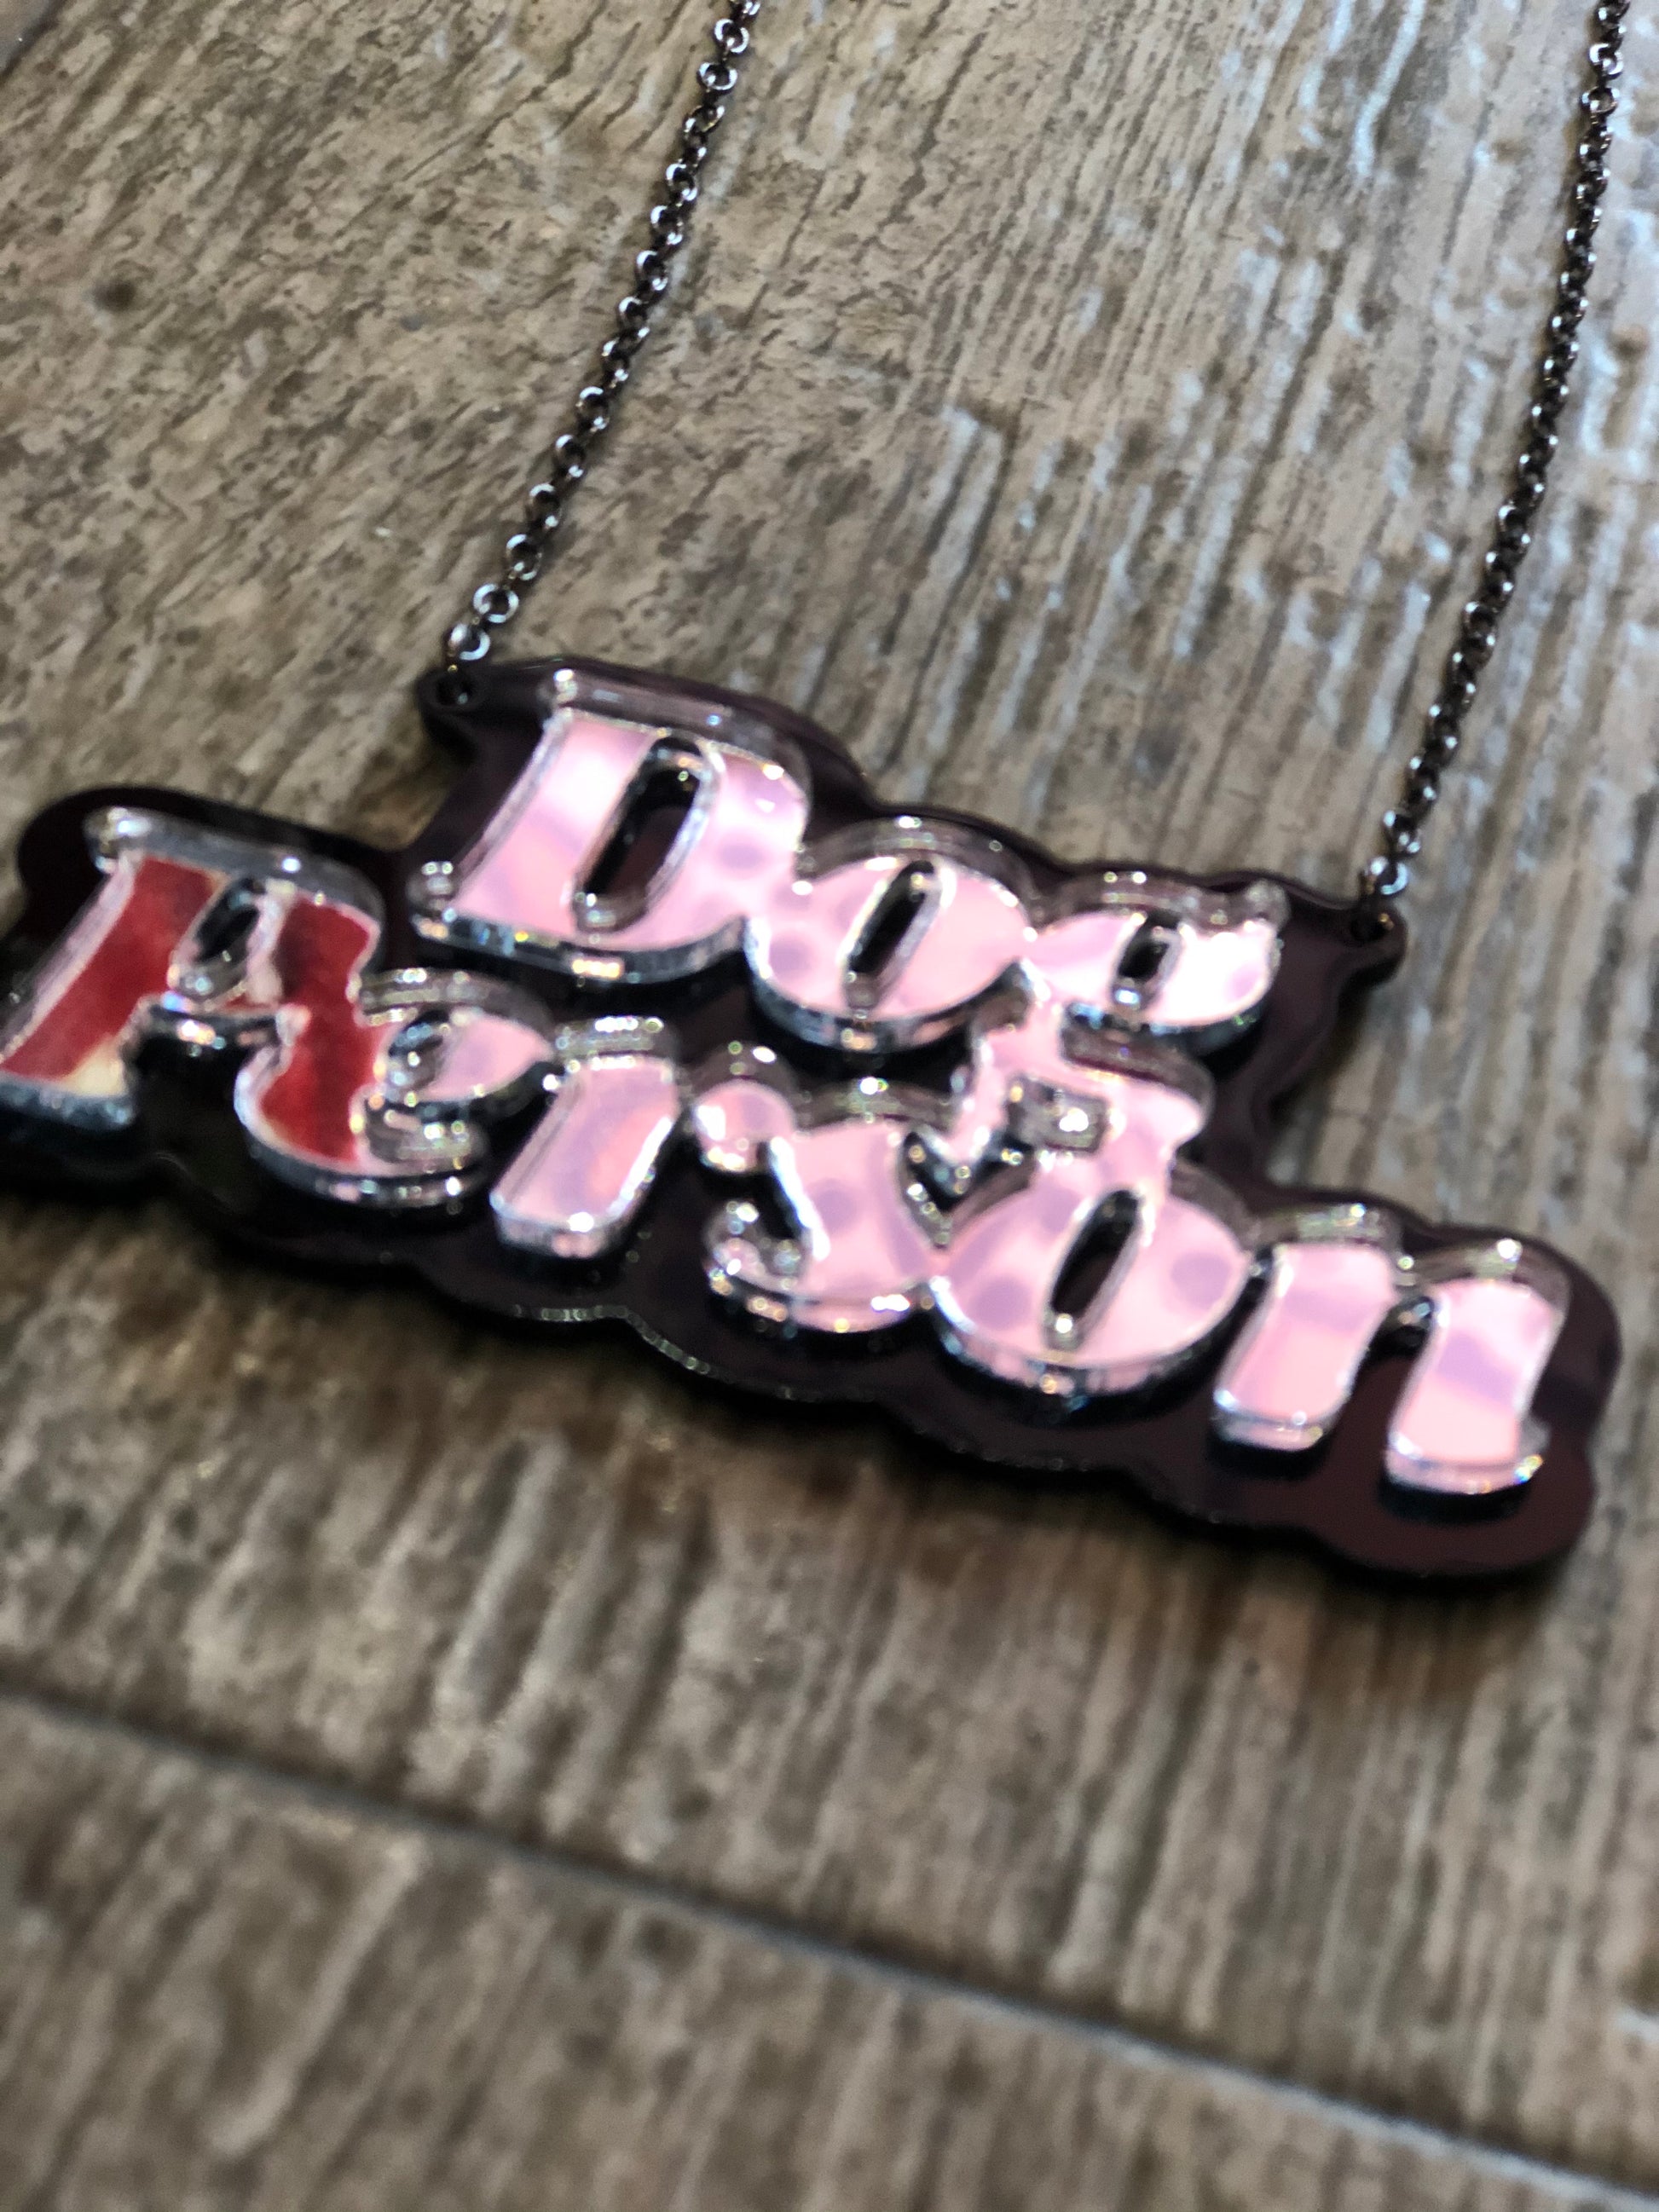 Dog Person Acrylic Necklace by Gumball Poodle - Spark Pretty